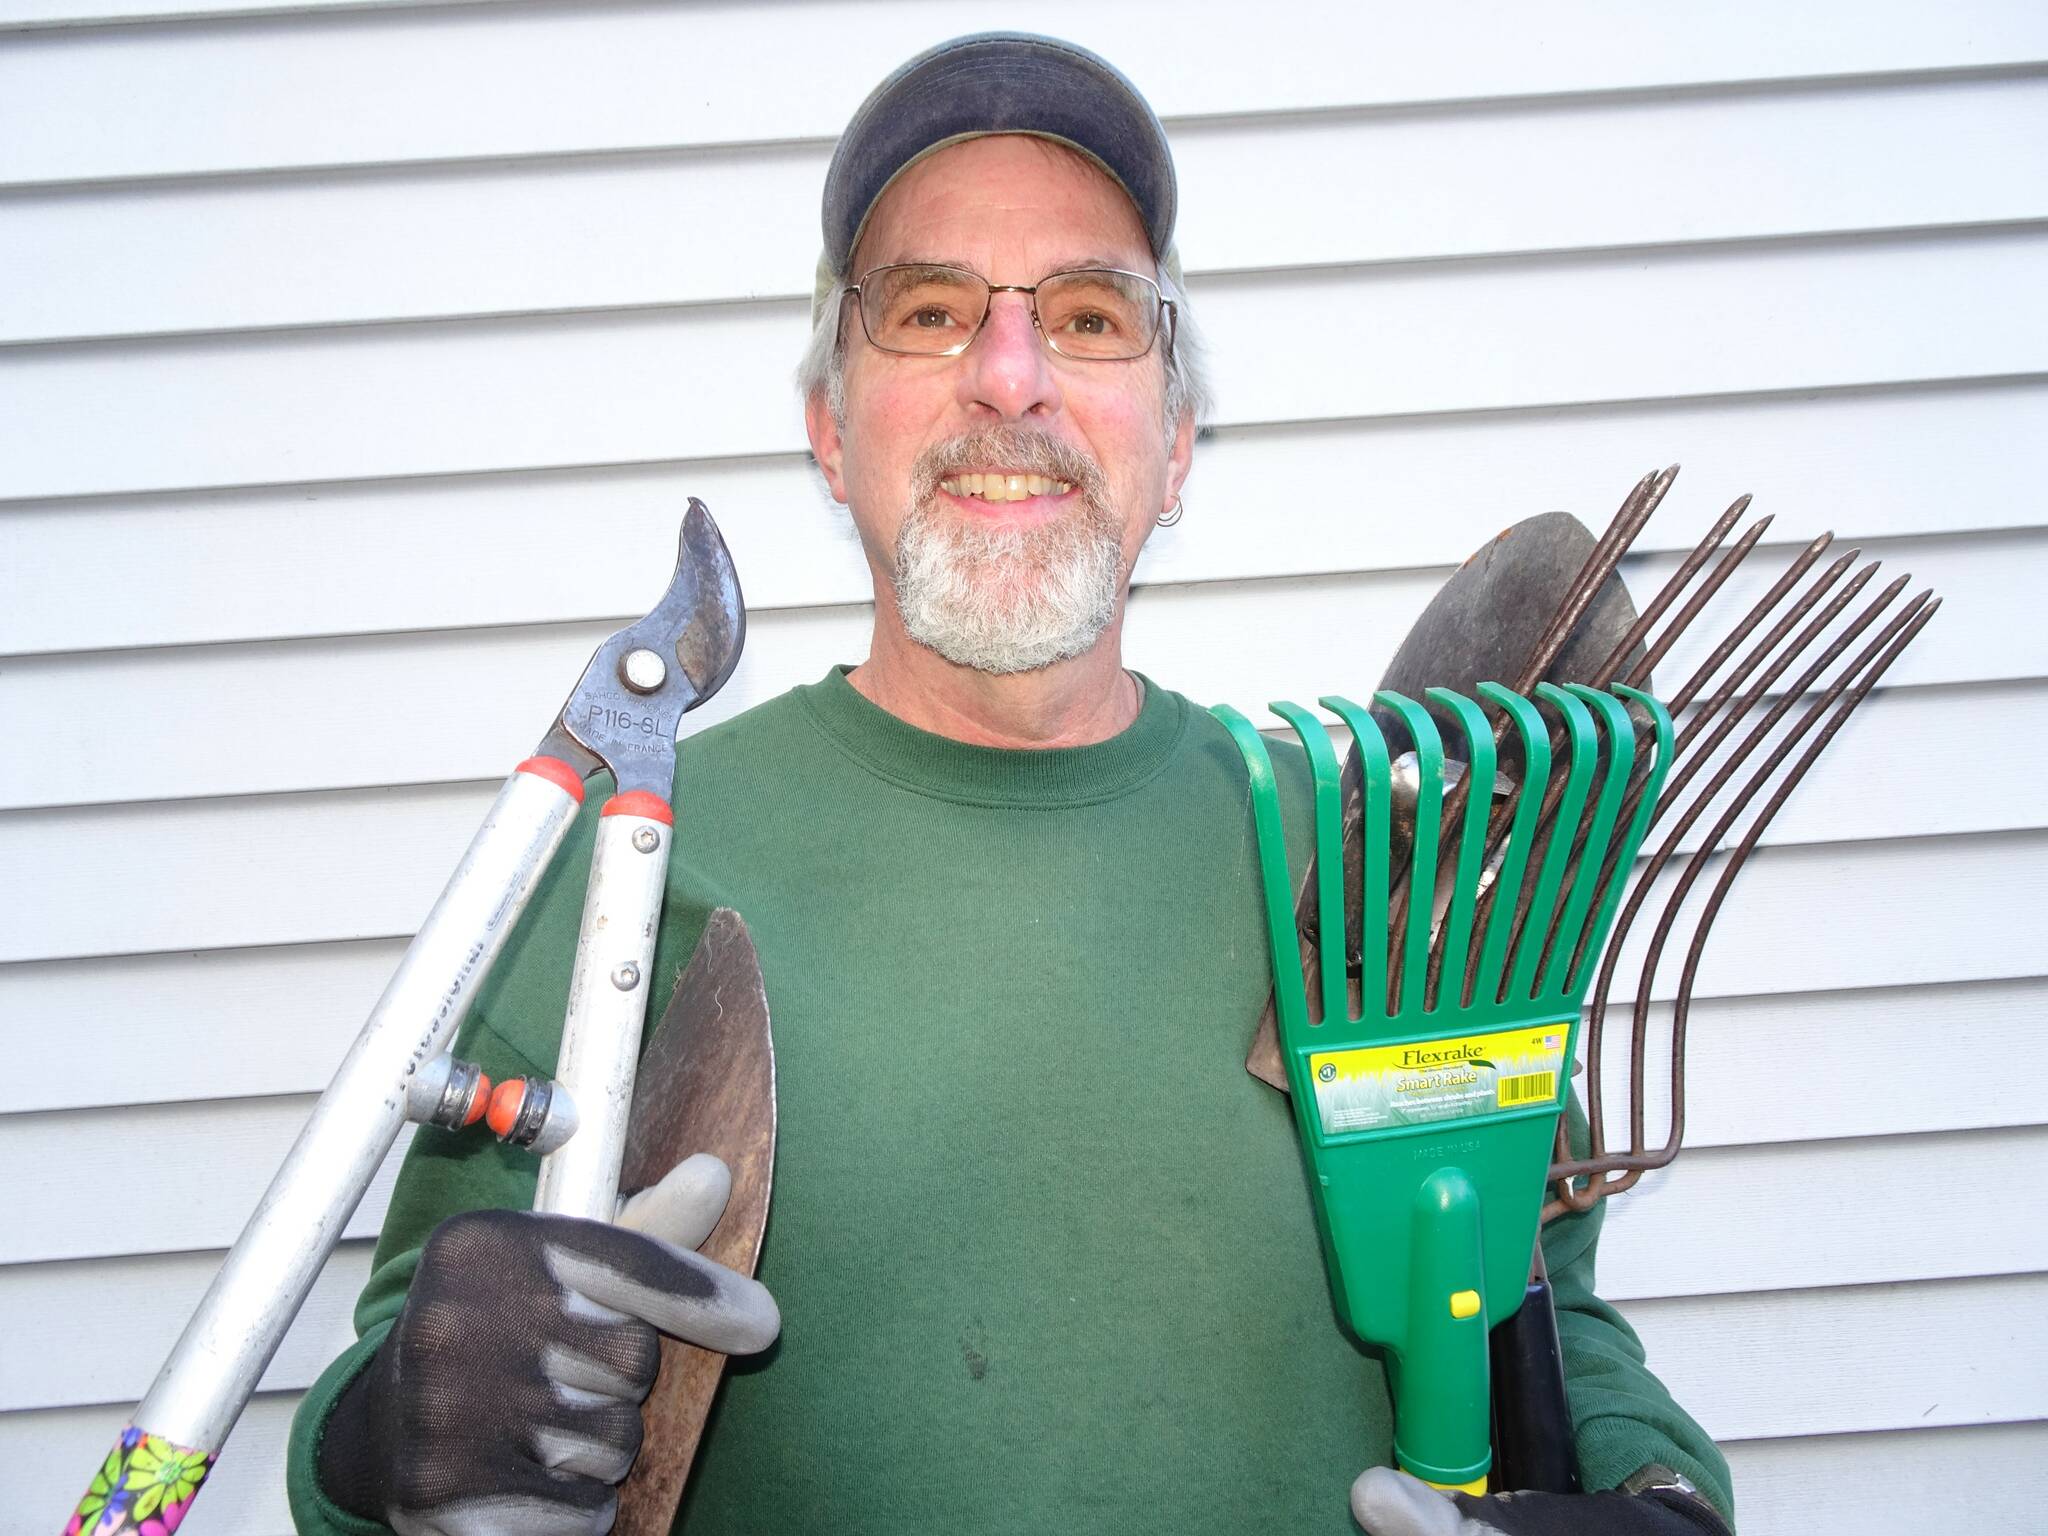 Learn about purchasing and caring for gardening tools from Master Gardener and active PlantAmnesty volunteer, Keith Dekker, via his Zoom lecture, Thursday, December 9th from noon to 1:00 pm. Photo Credit: Keith Dekker